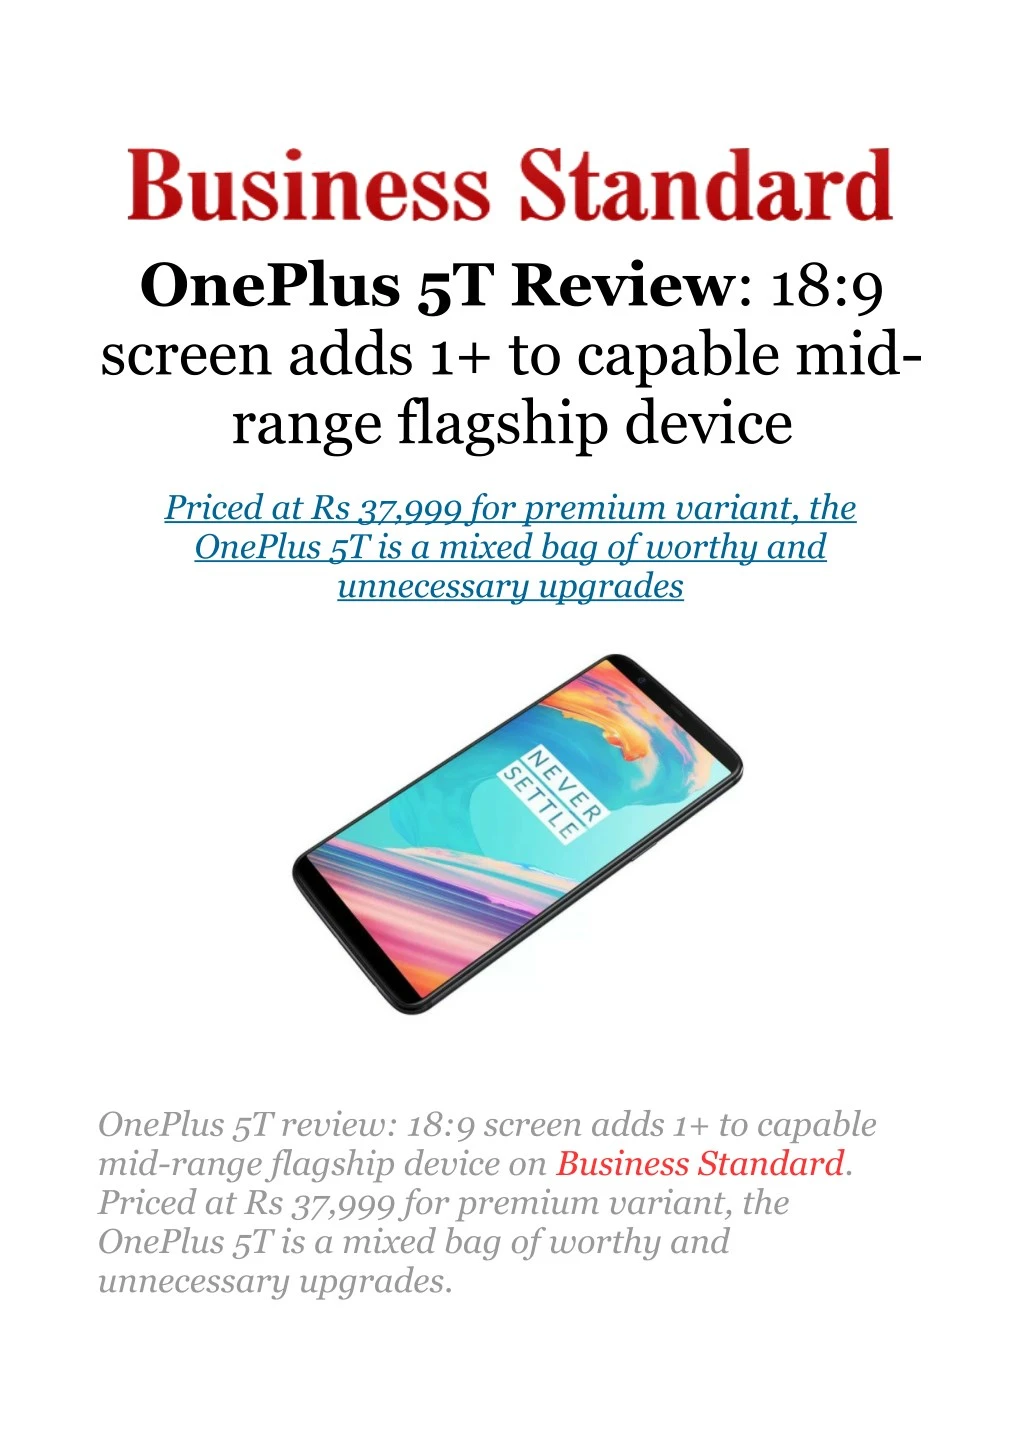 oneplus 5t review 18 9 screen adds 1 to capable